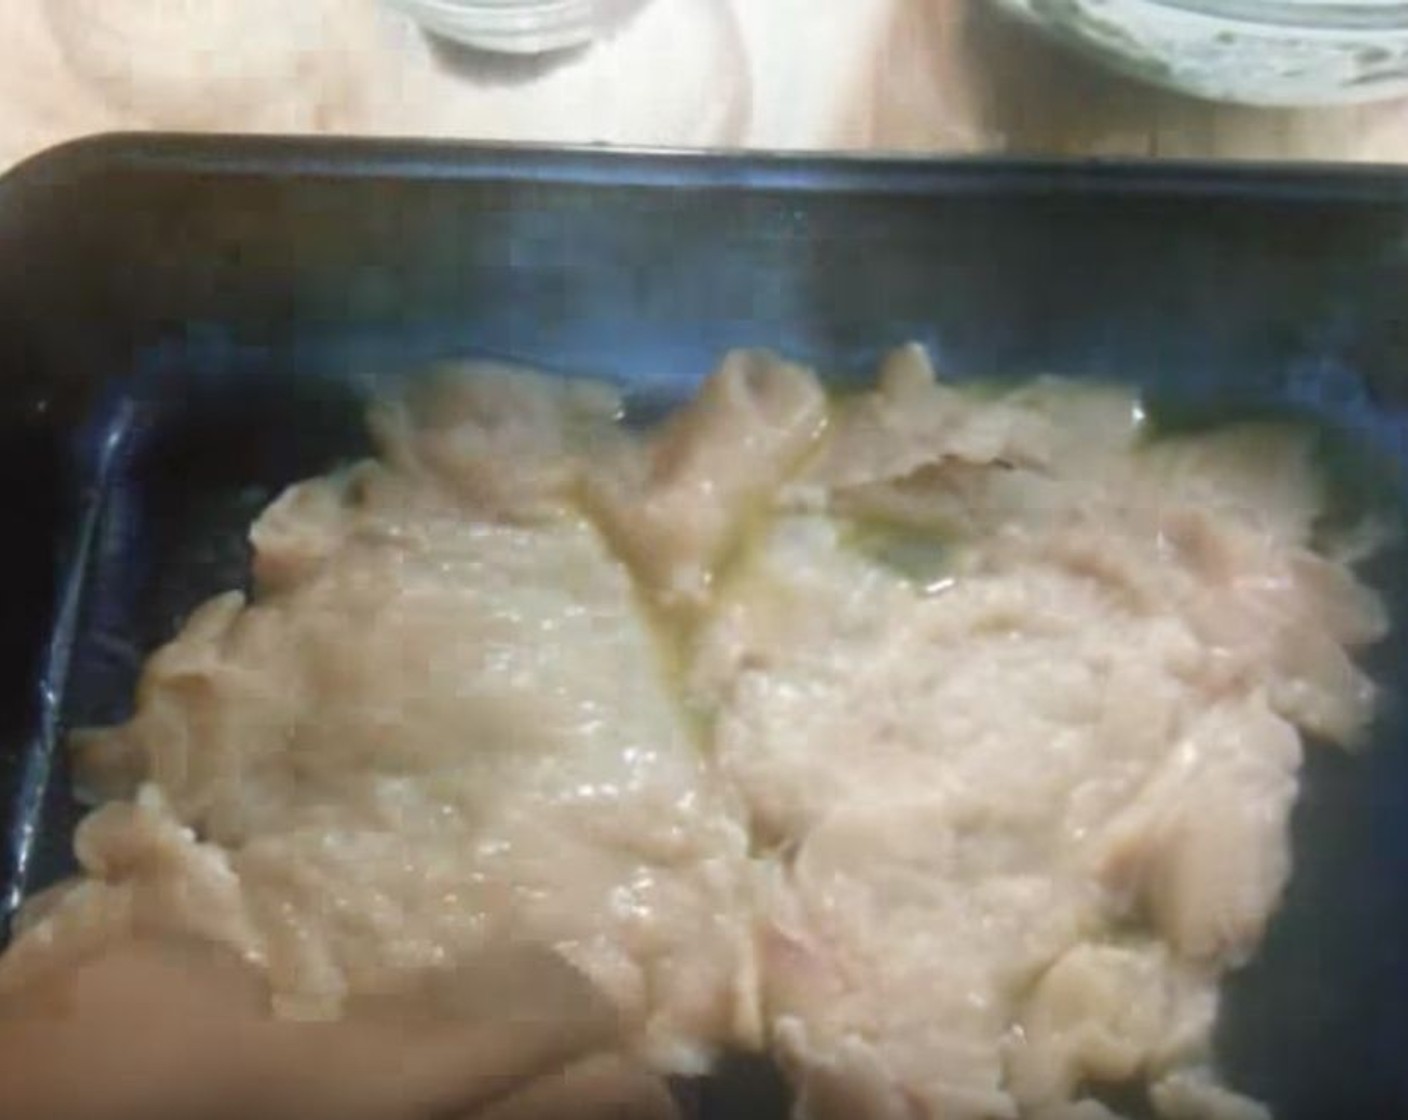 step 4 Into a casserole pan, add Butter (2 Tbsp). Lay two halves of the Tyson® Chicken Breasts (2) on top.